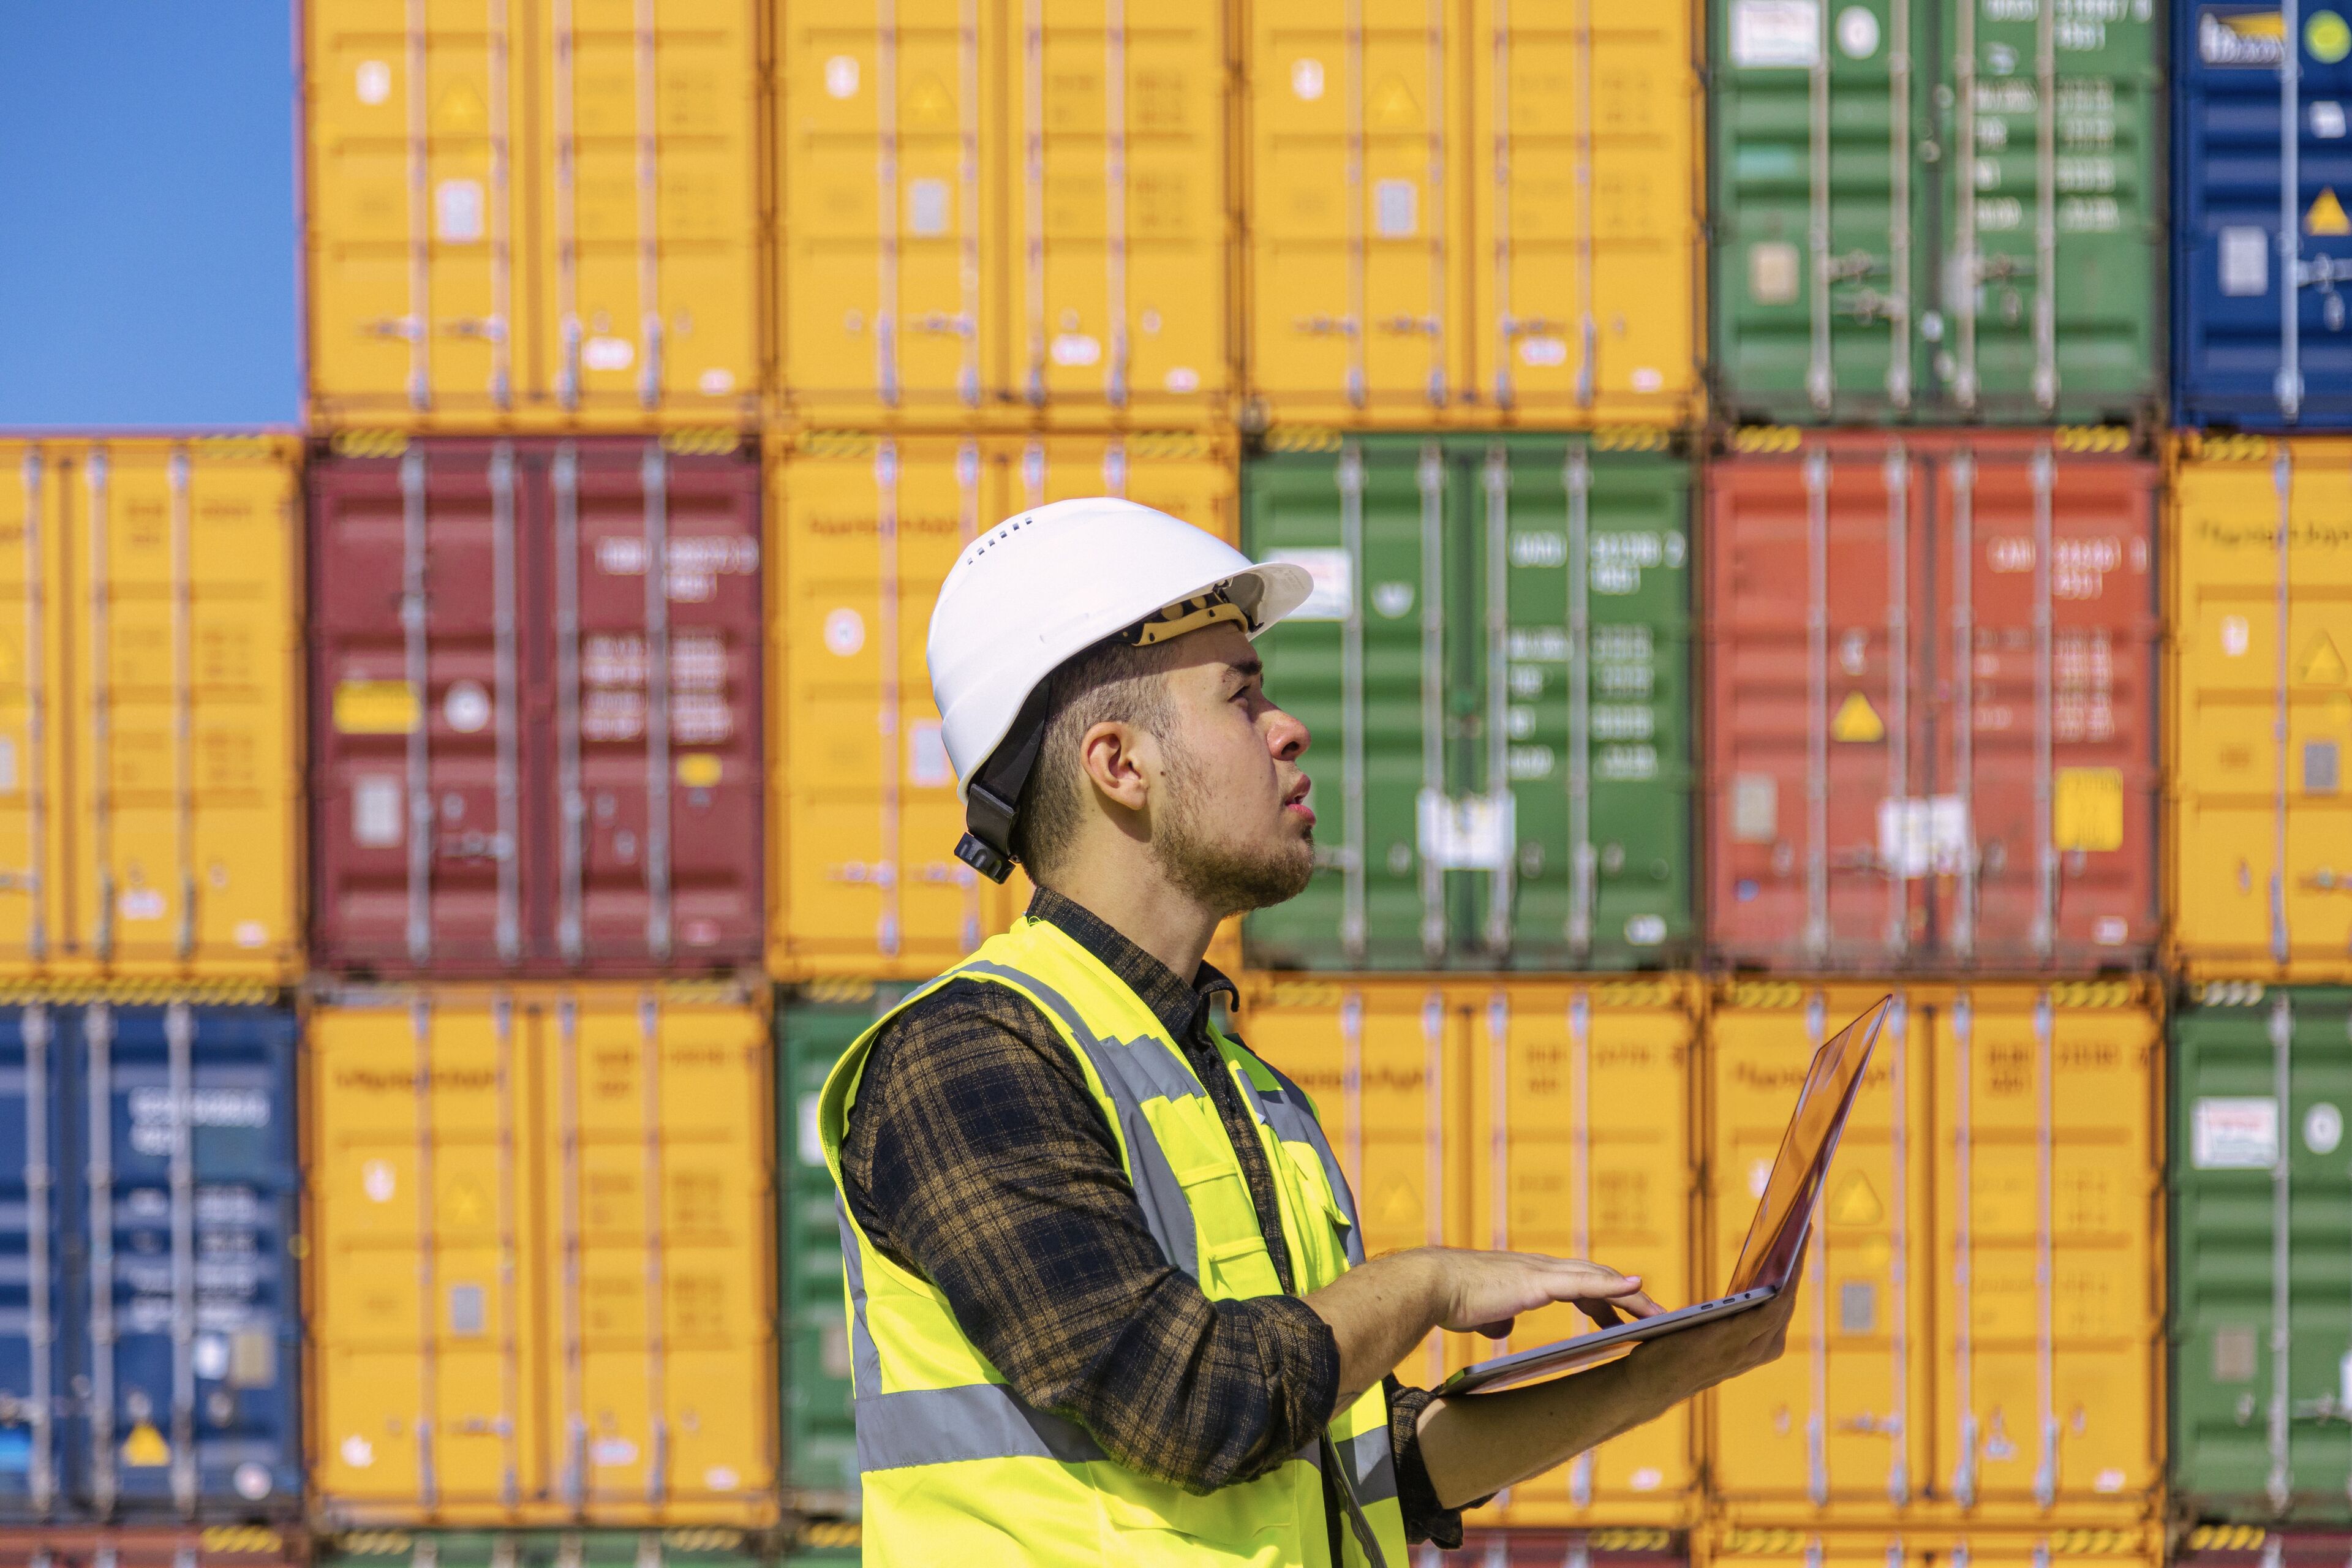 A man in a safety vest and helmet inspects paperwork with cargo containers in the background.